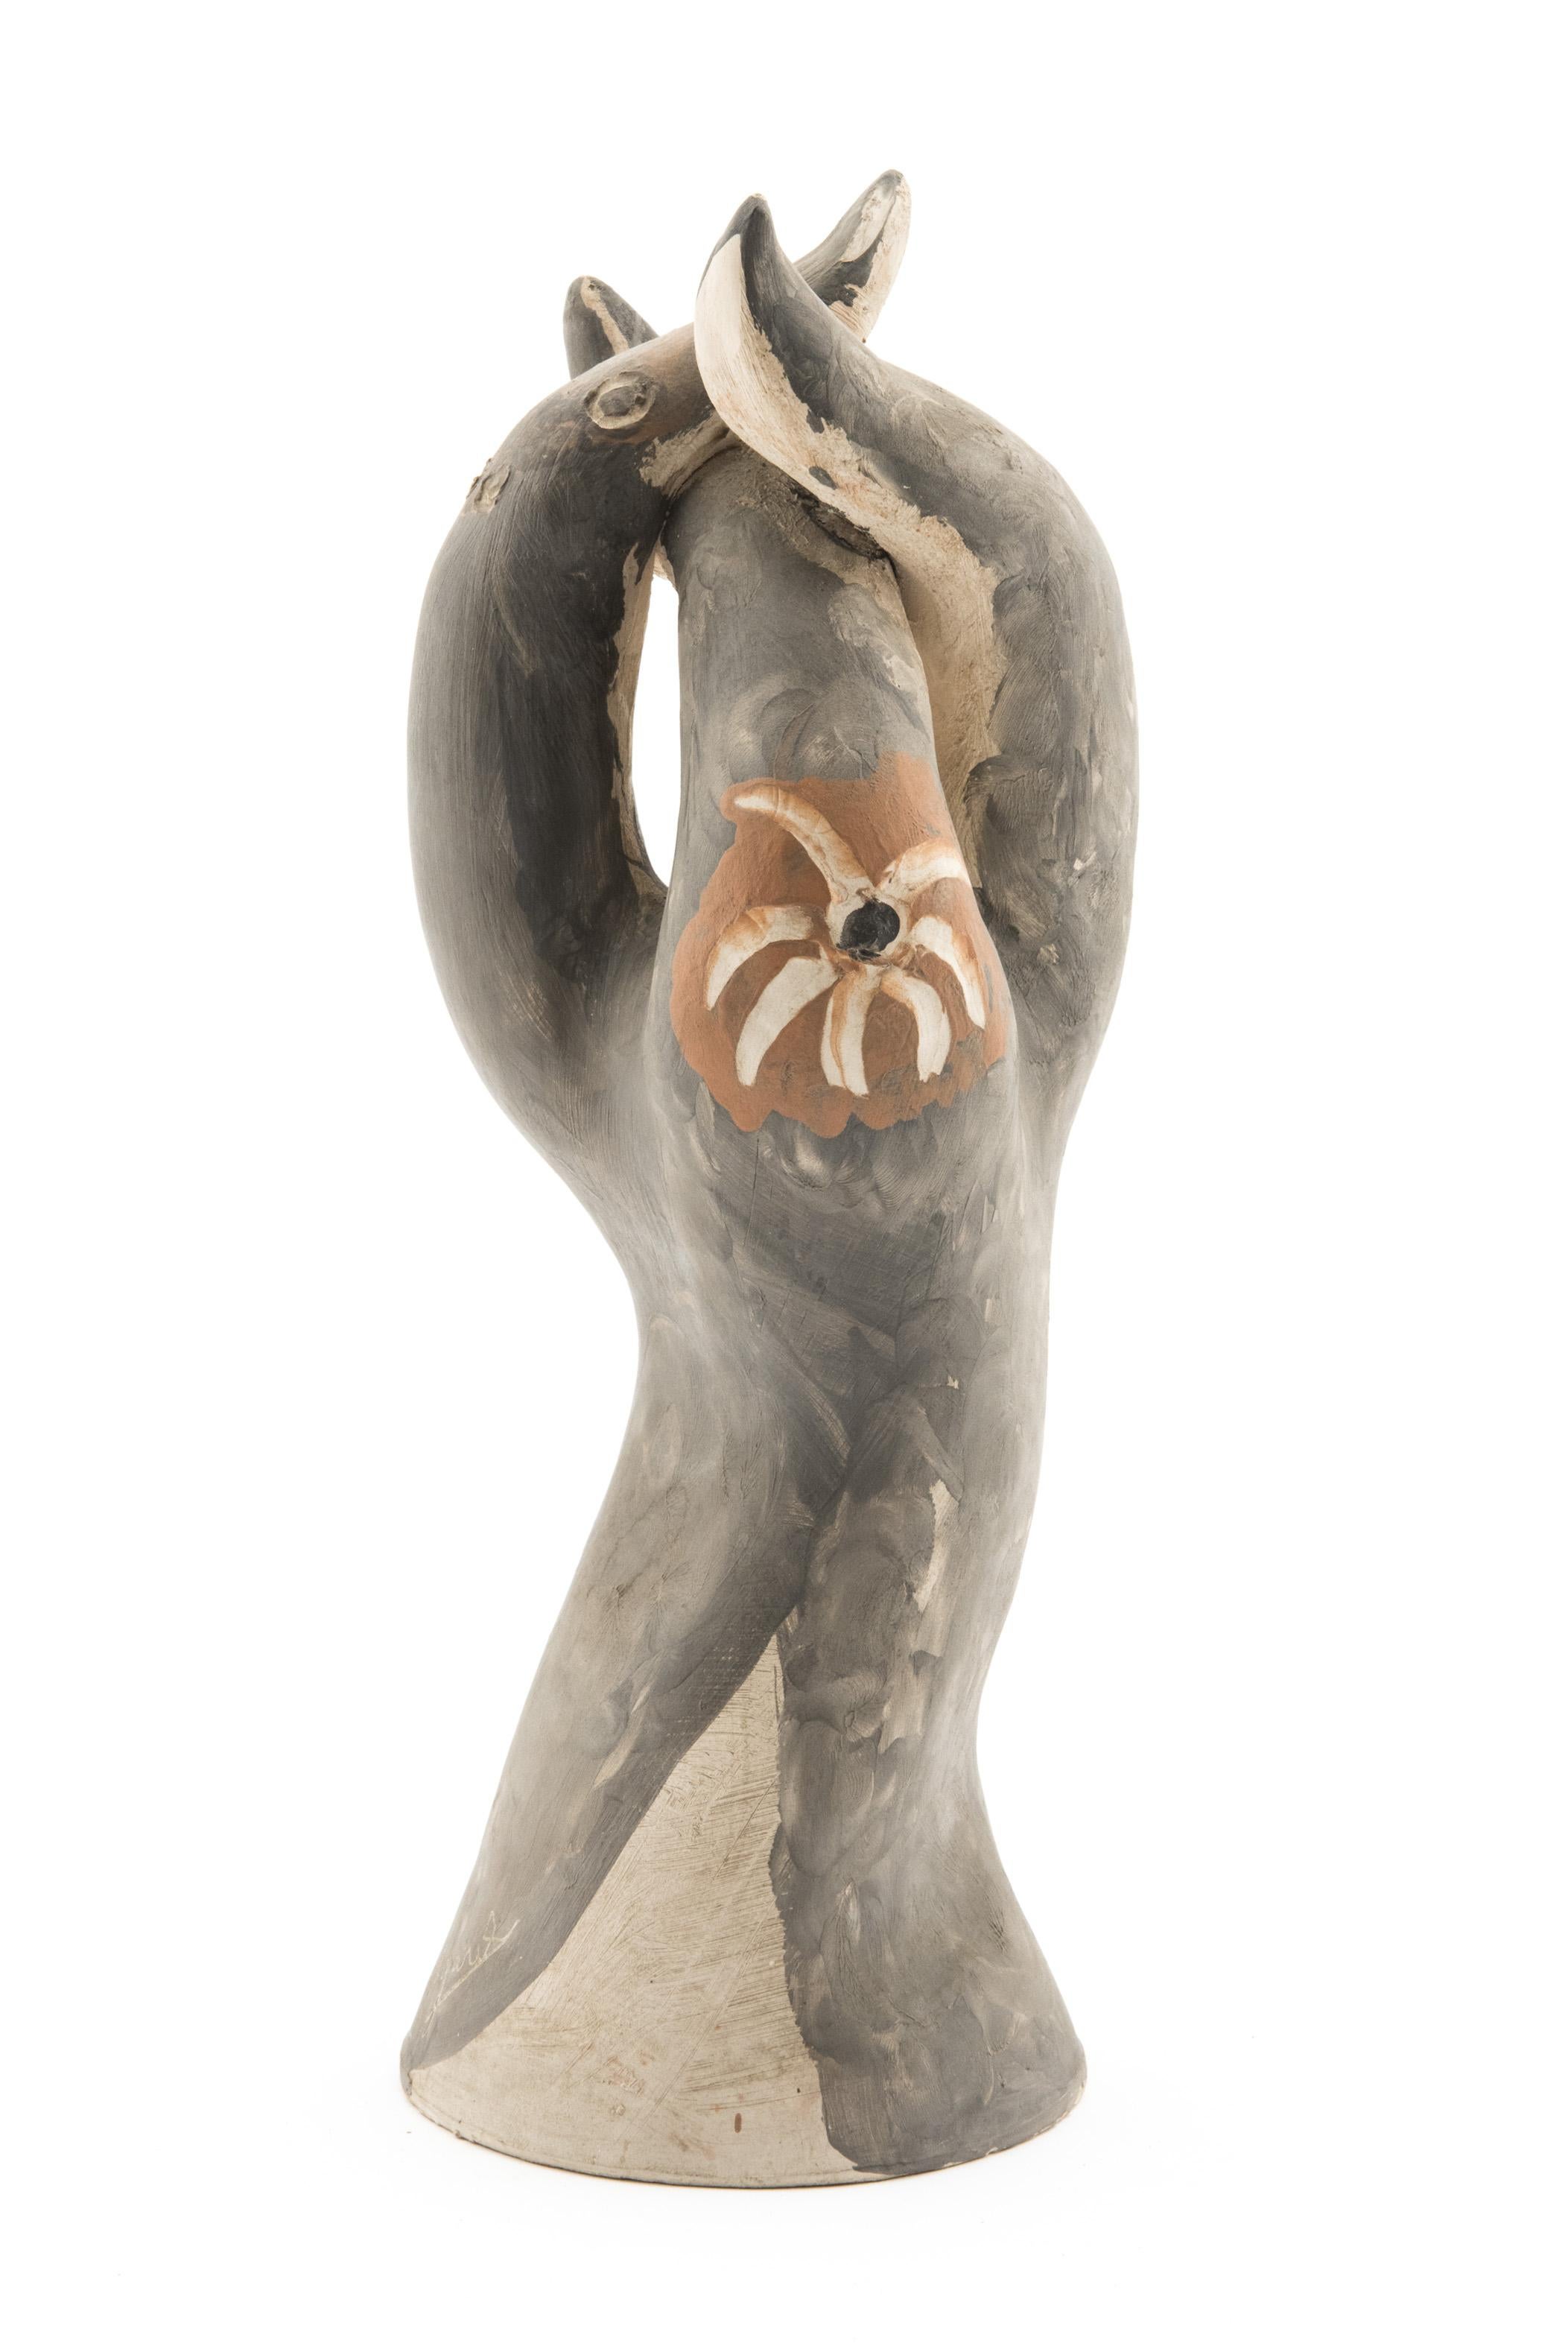 Abstract /figurative, could also be seen as a zoomorphic hand painted sculpture in terracotta by Jules Agard, 1950s, open at the bottom, interwind tentacles on top. 
Jules Agard did not necessarily want an exact description of his designs. What